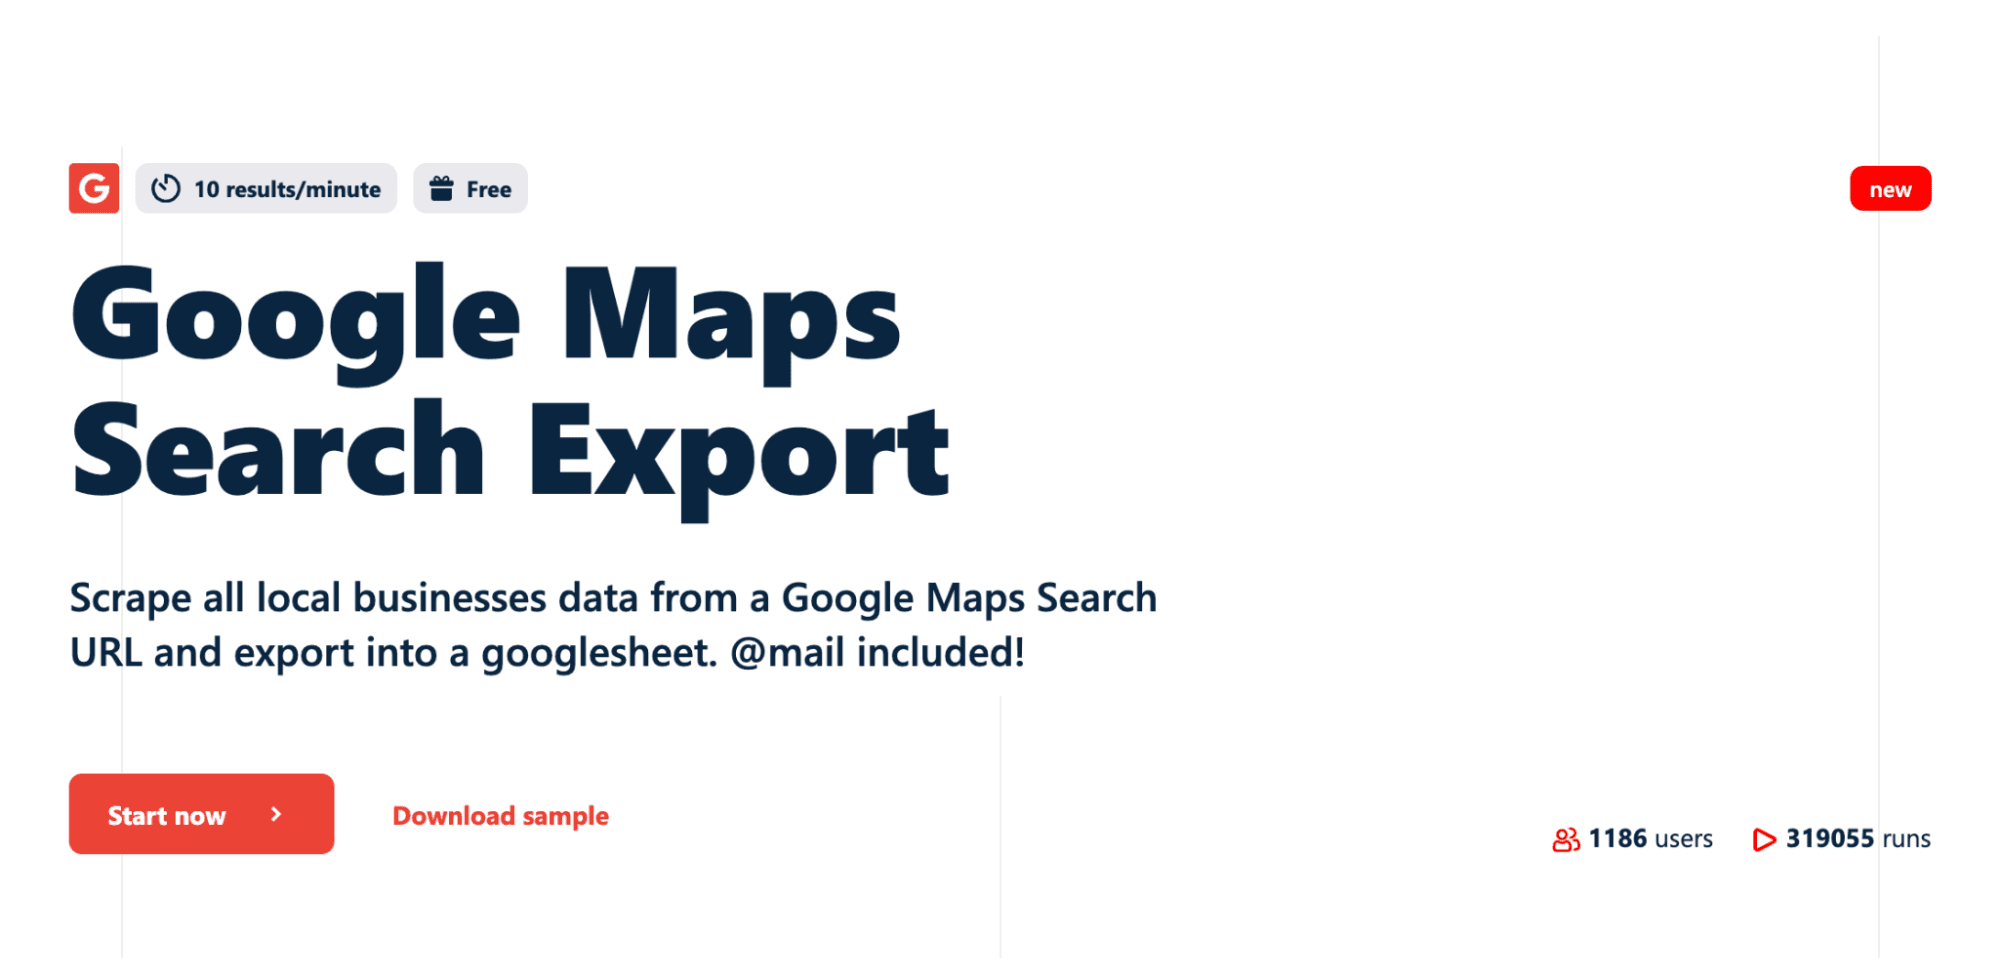 google maps search export lobstr product page - image23.png